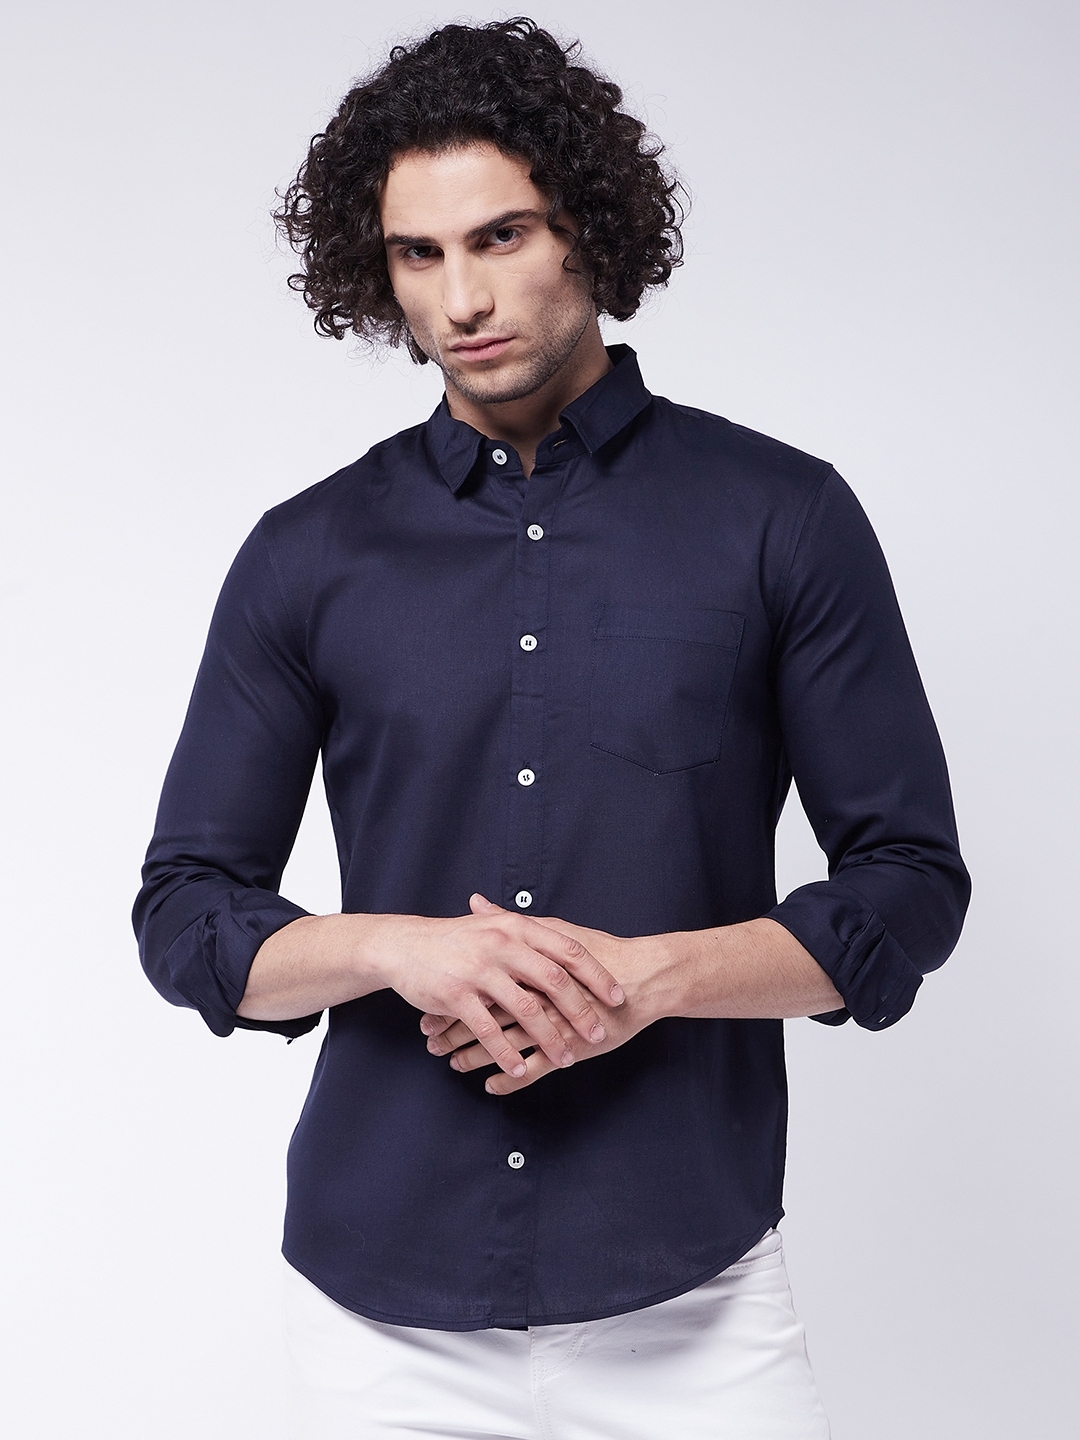 Rick Masch Men's Slim Fit Fine Cotton Solid Full Sleeves Casual Shirt